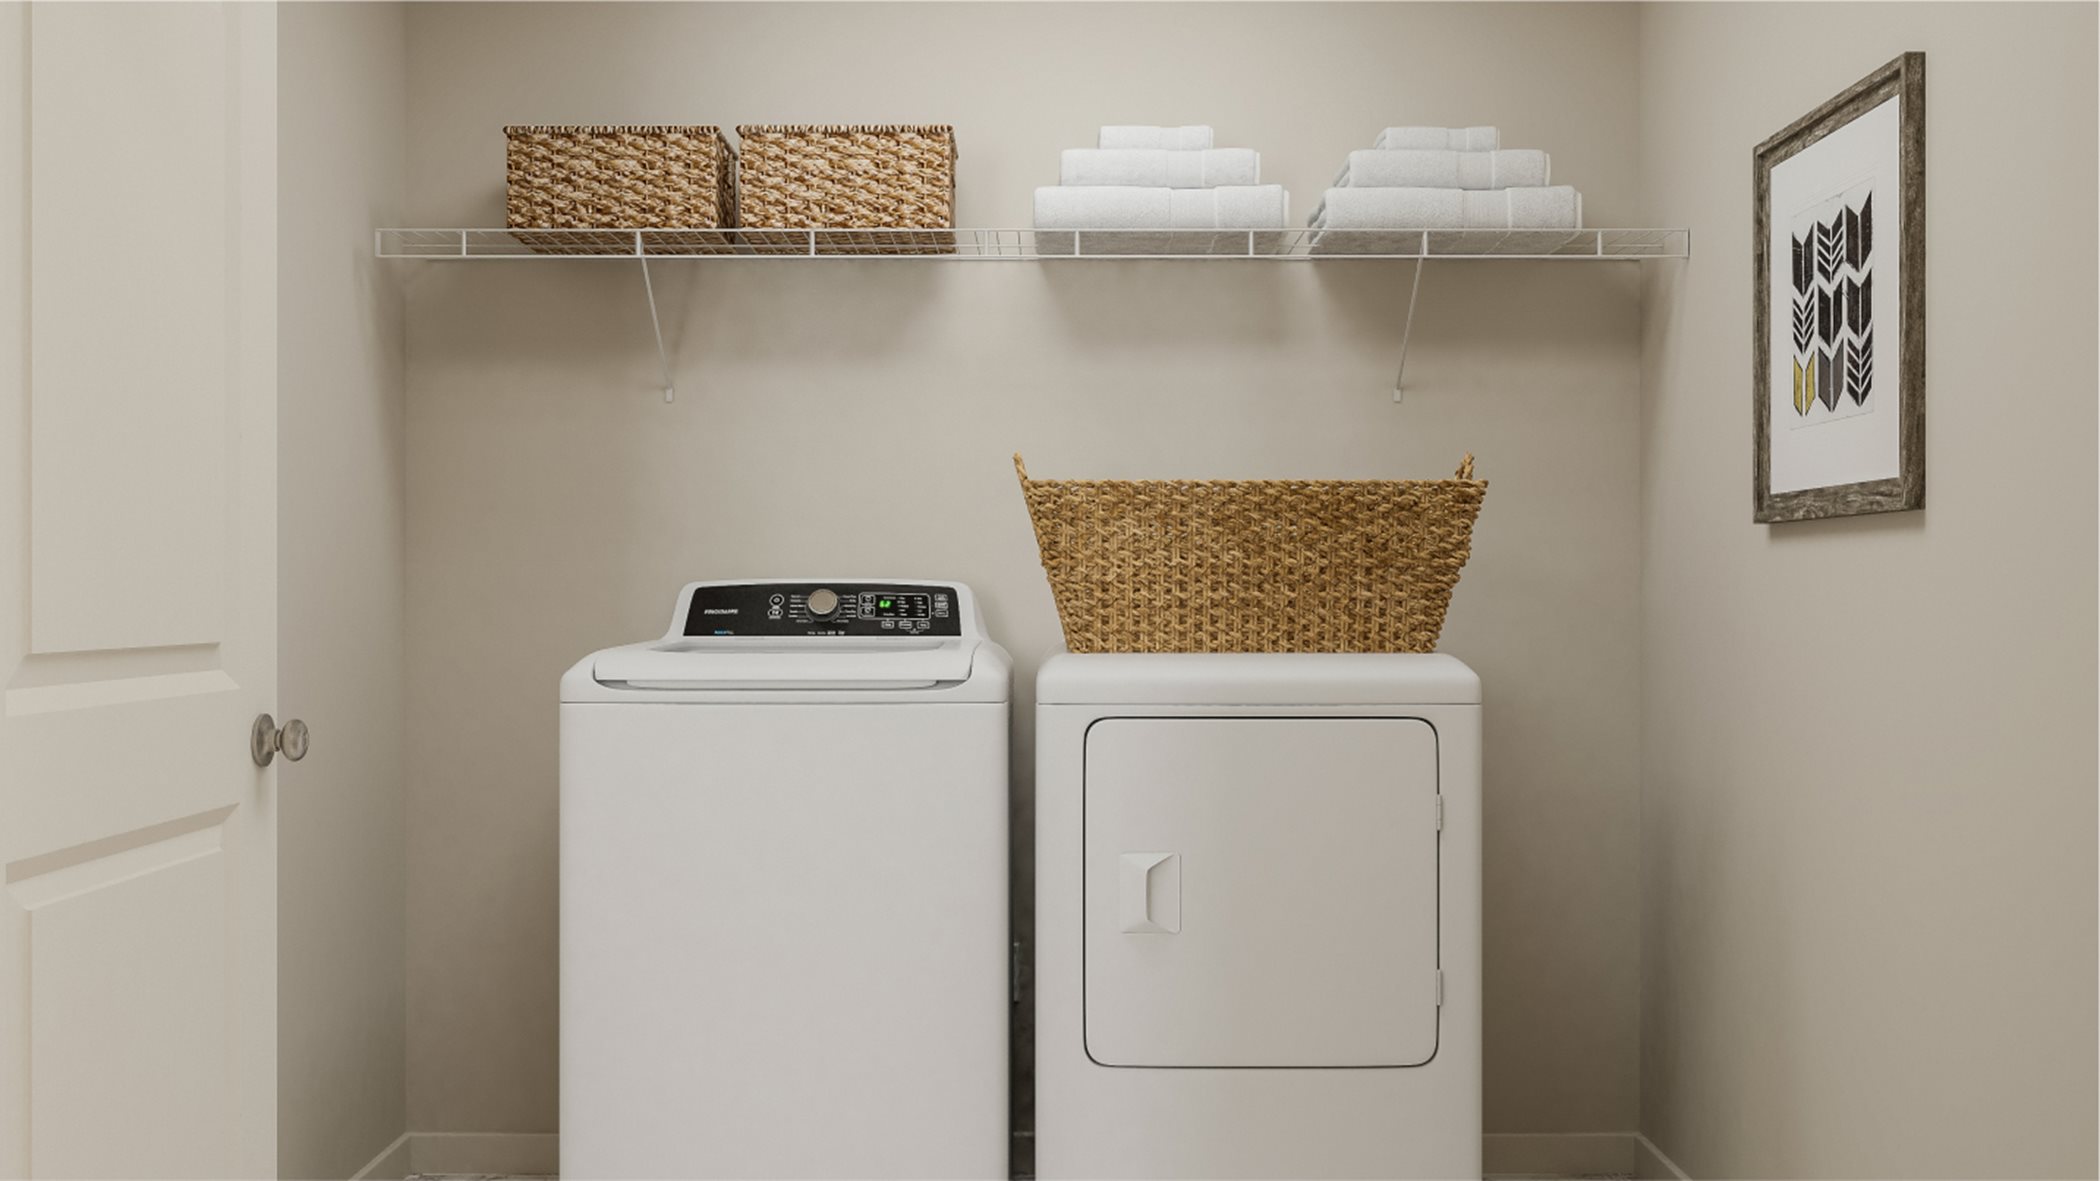 Brynley Laundry Room